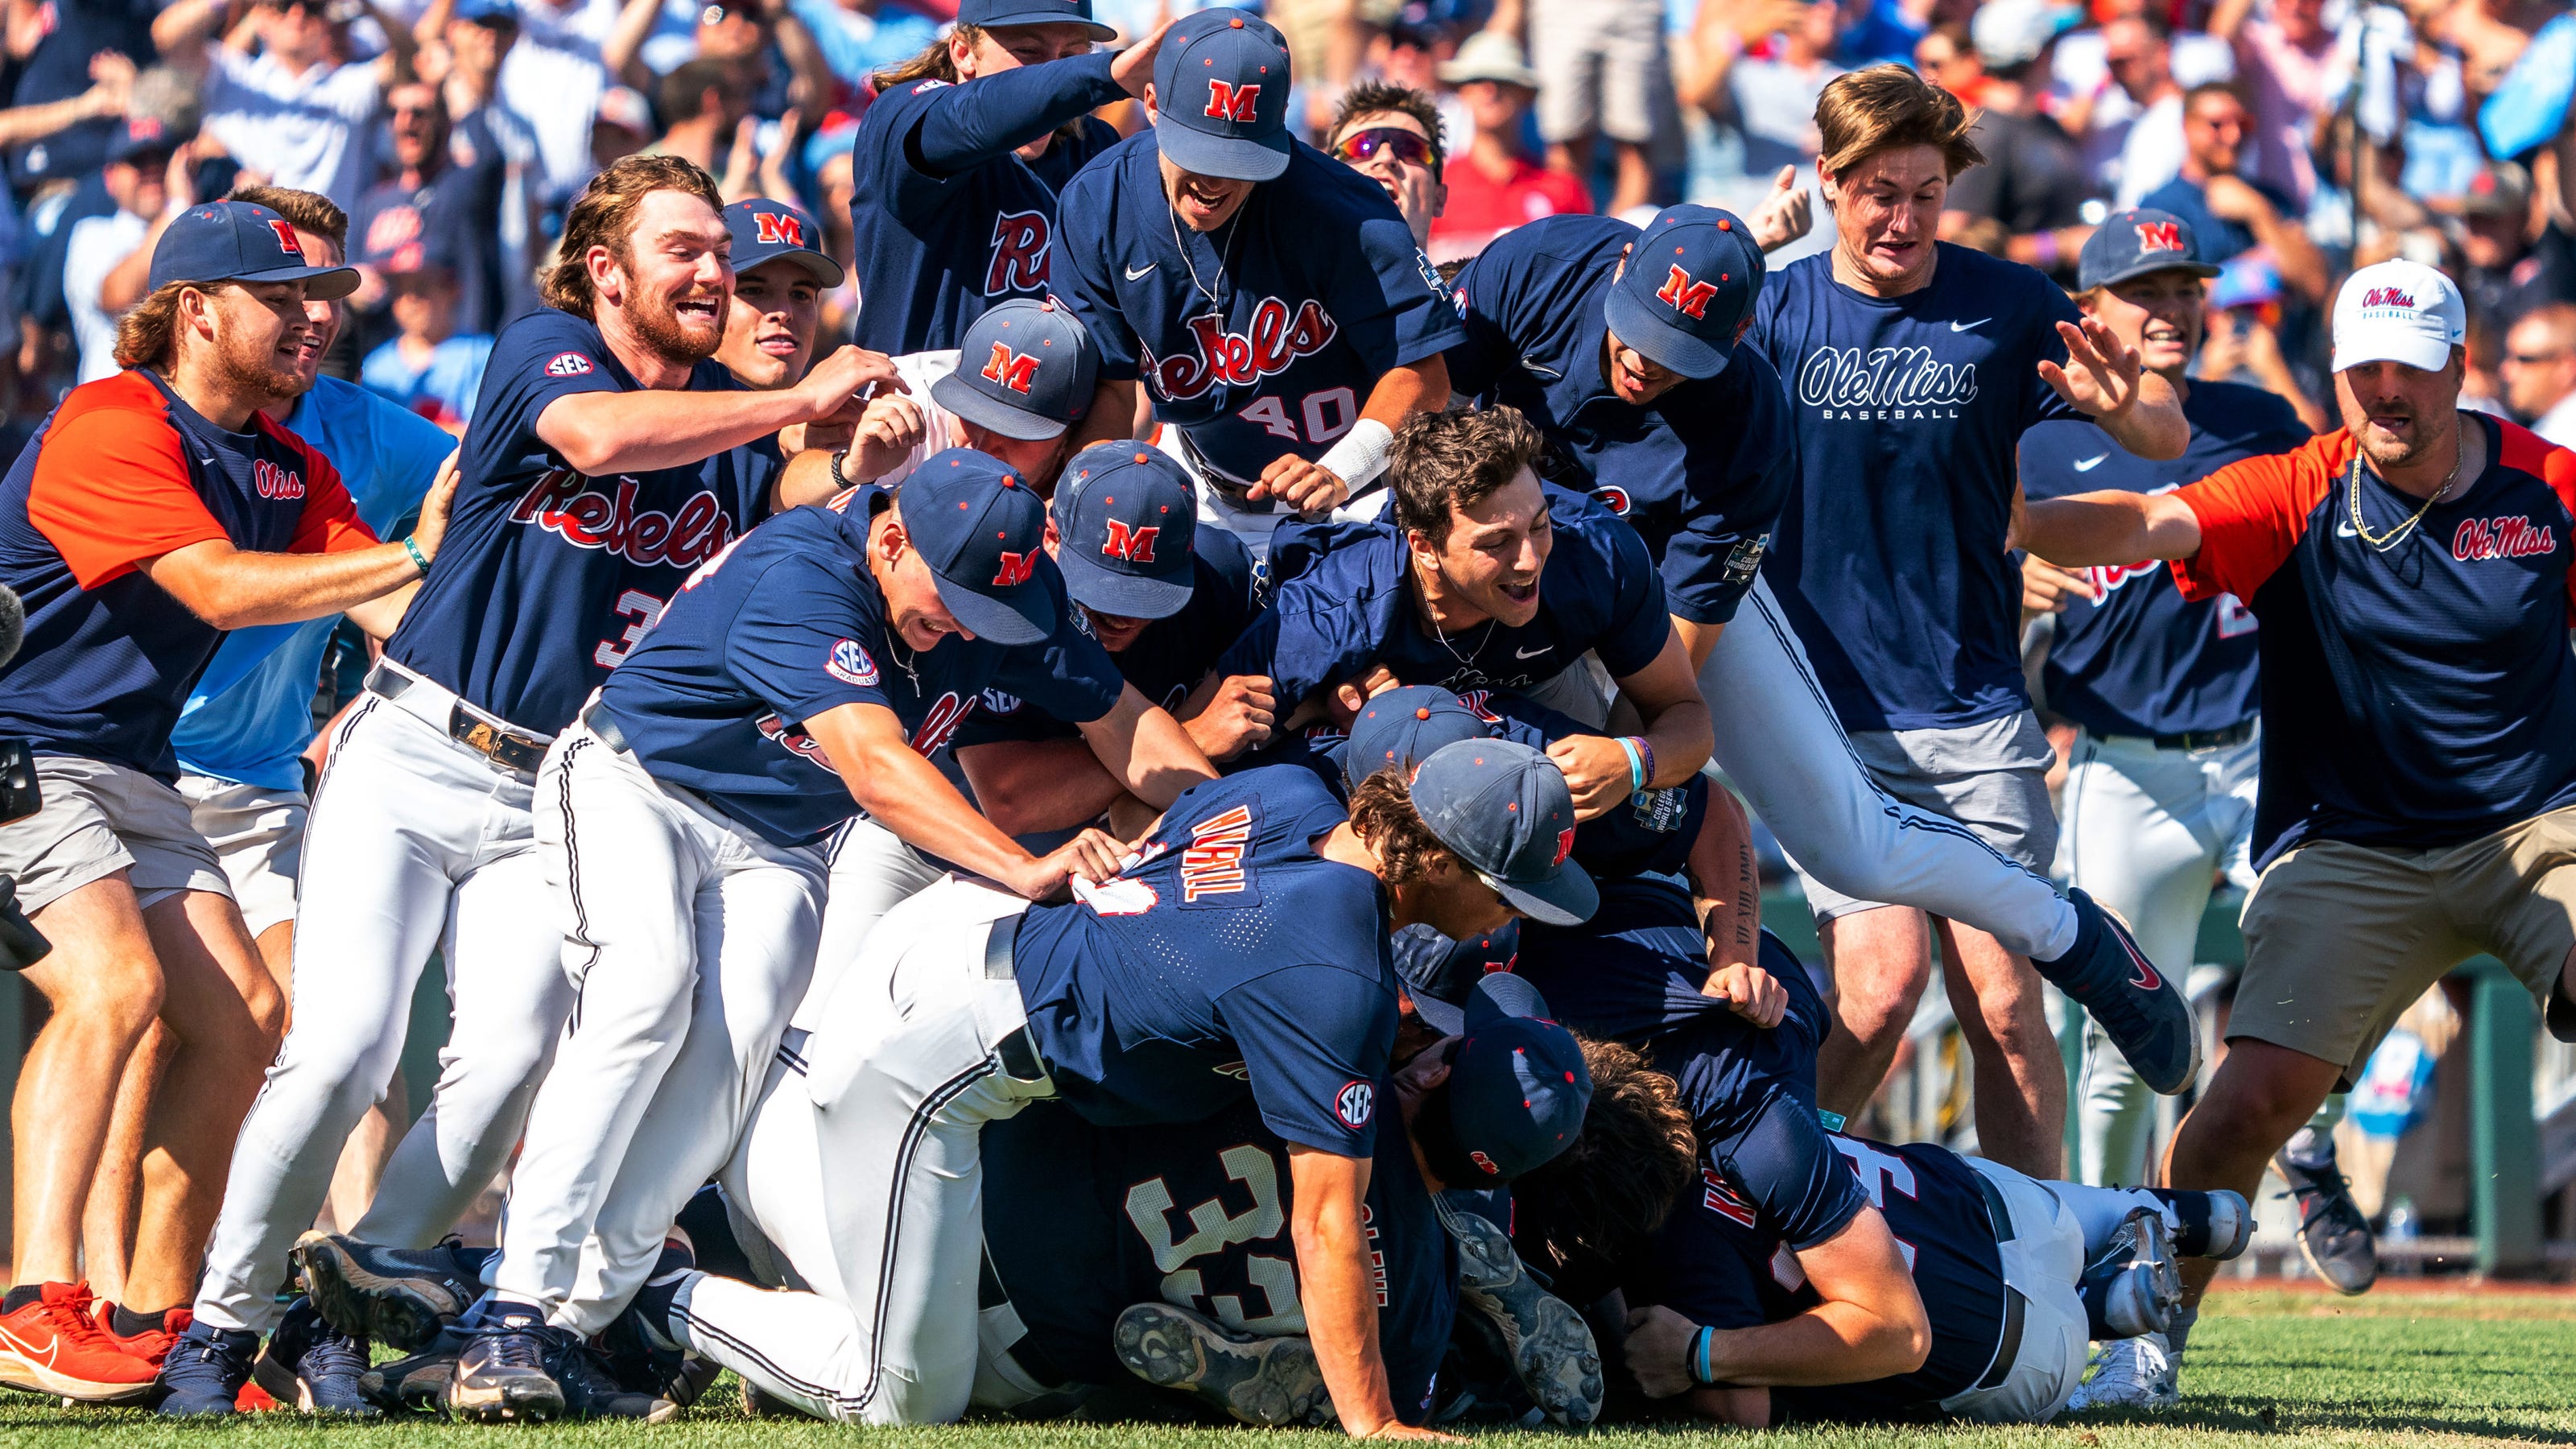 Ole Miss wins College World Series title, beating Oklahoma